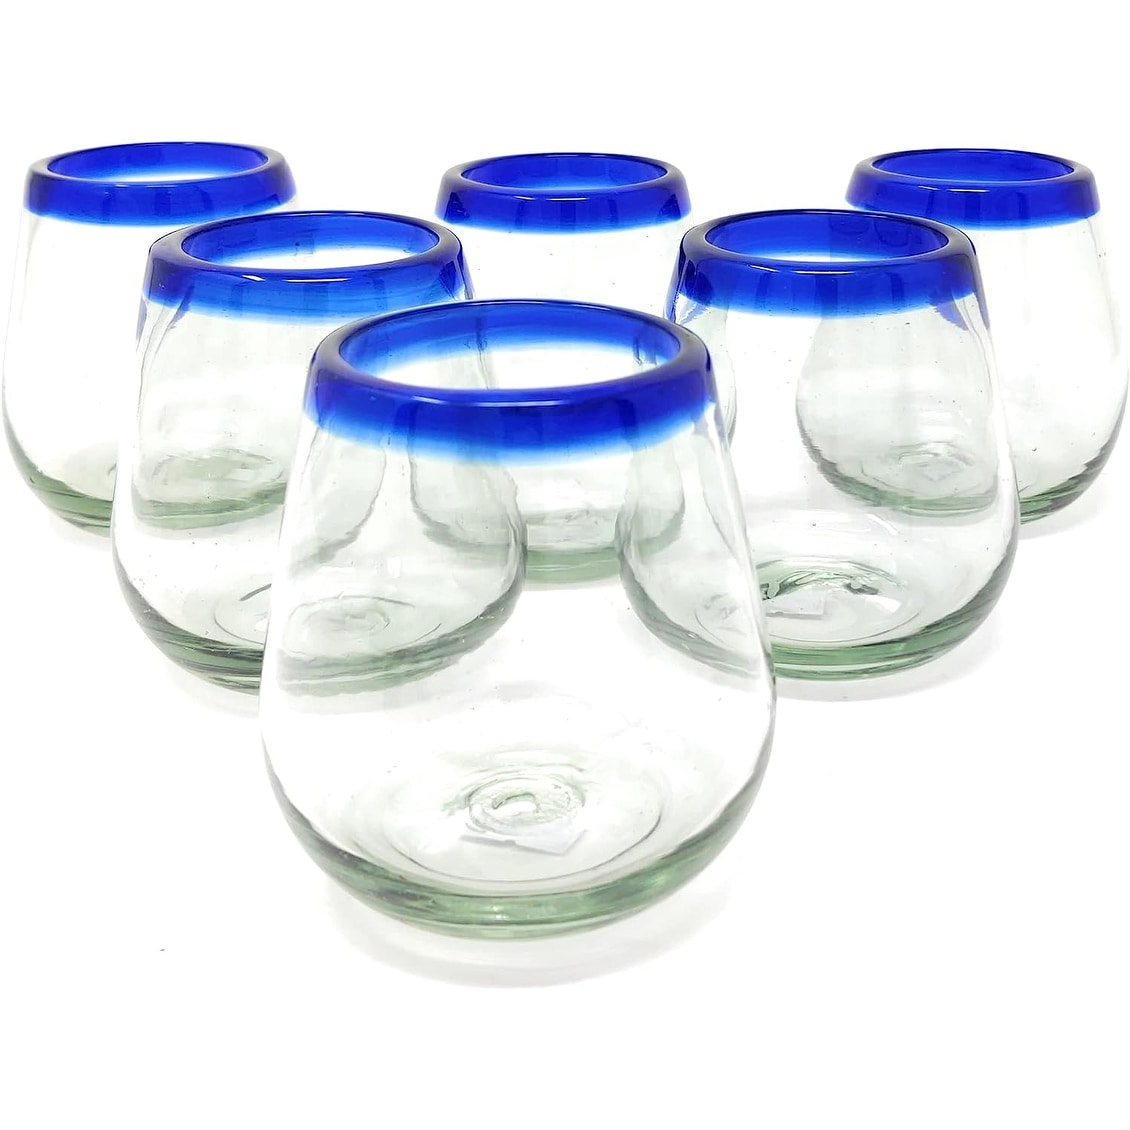 https://ak1.ostkcdn.com/images/products/is/images/direct/e6a580b5a702c3764fc513febcca5a4df735c5d2/Hand-Blown-Mexican-Stemless-Wine-Glasses---Set-of-6-Glasses-with-Cobalt-Blue-Rims-%2815-oz%29.jpg